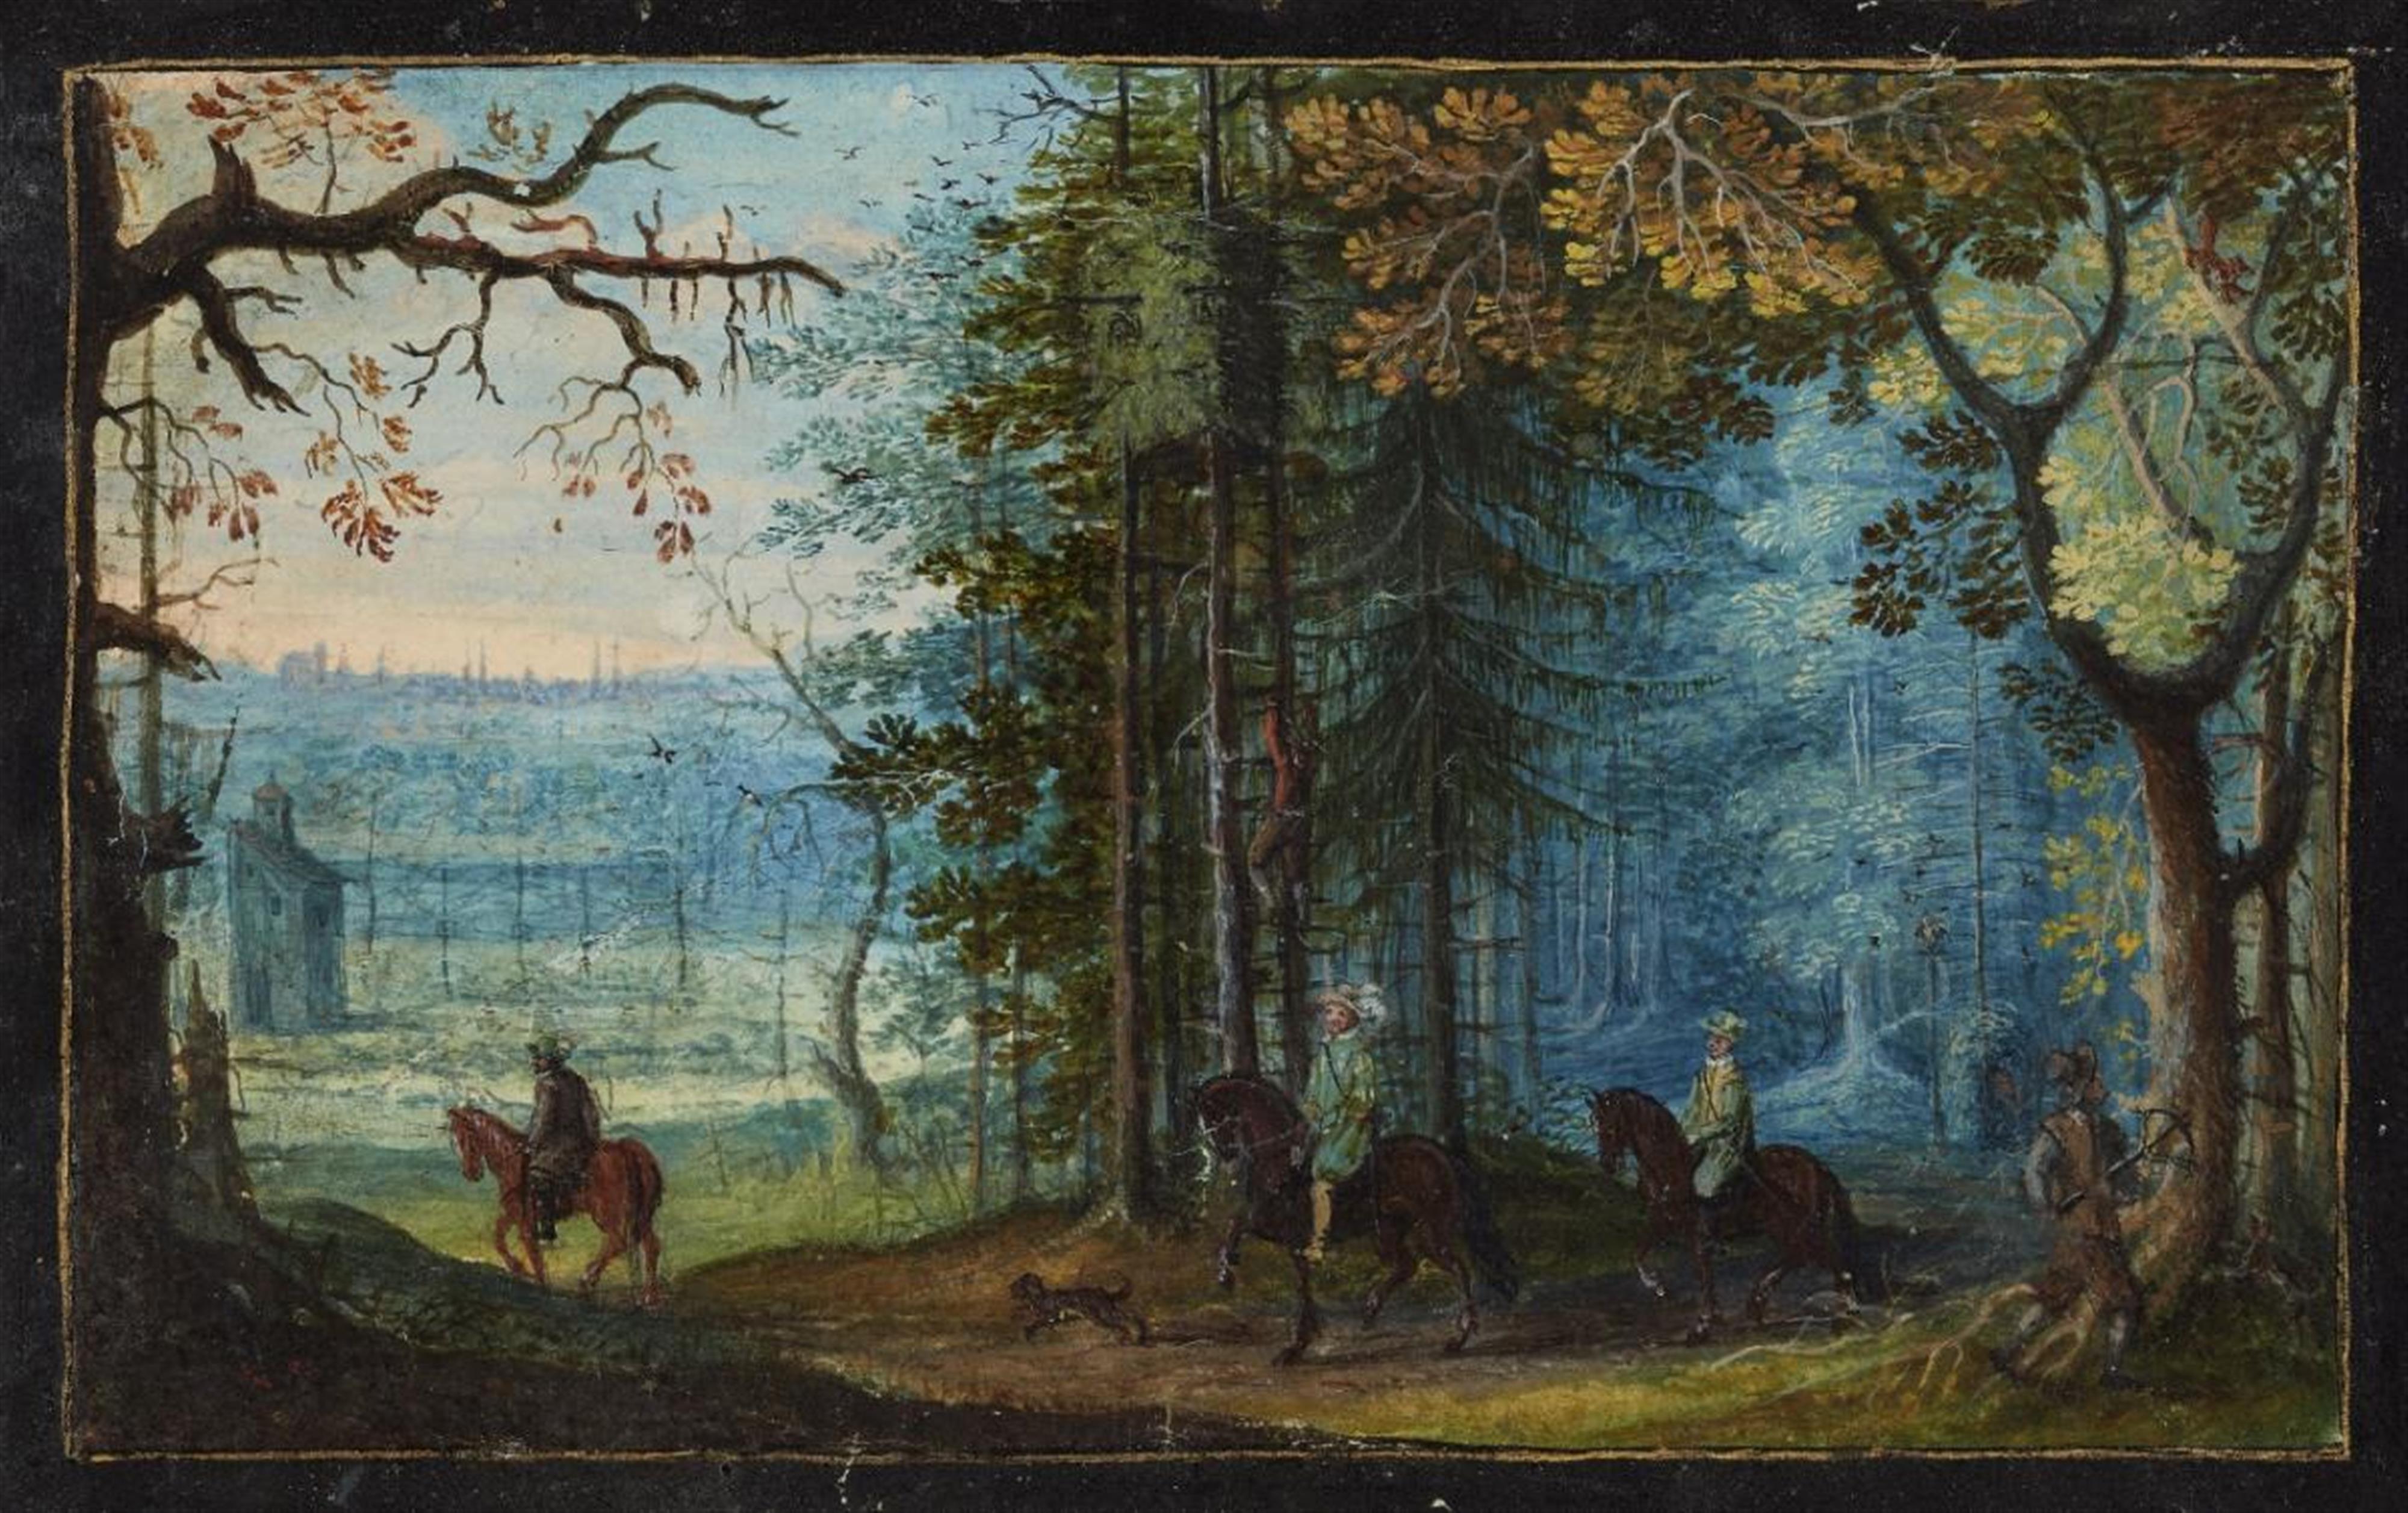 Flemish School ca. 1600 / 1610 - Riders in a Forest - image-1